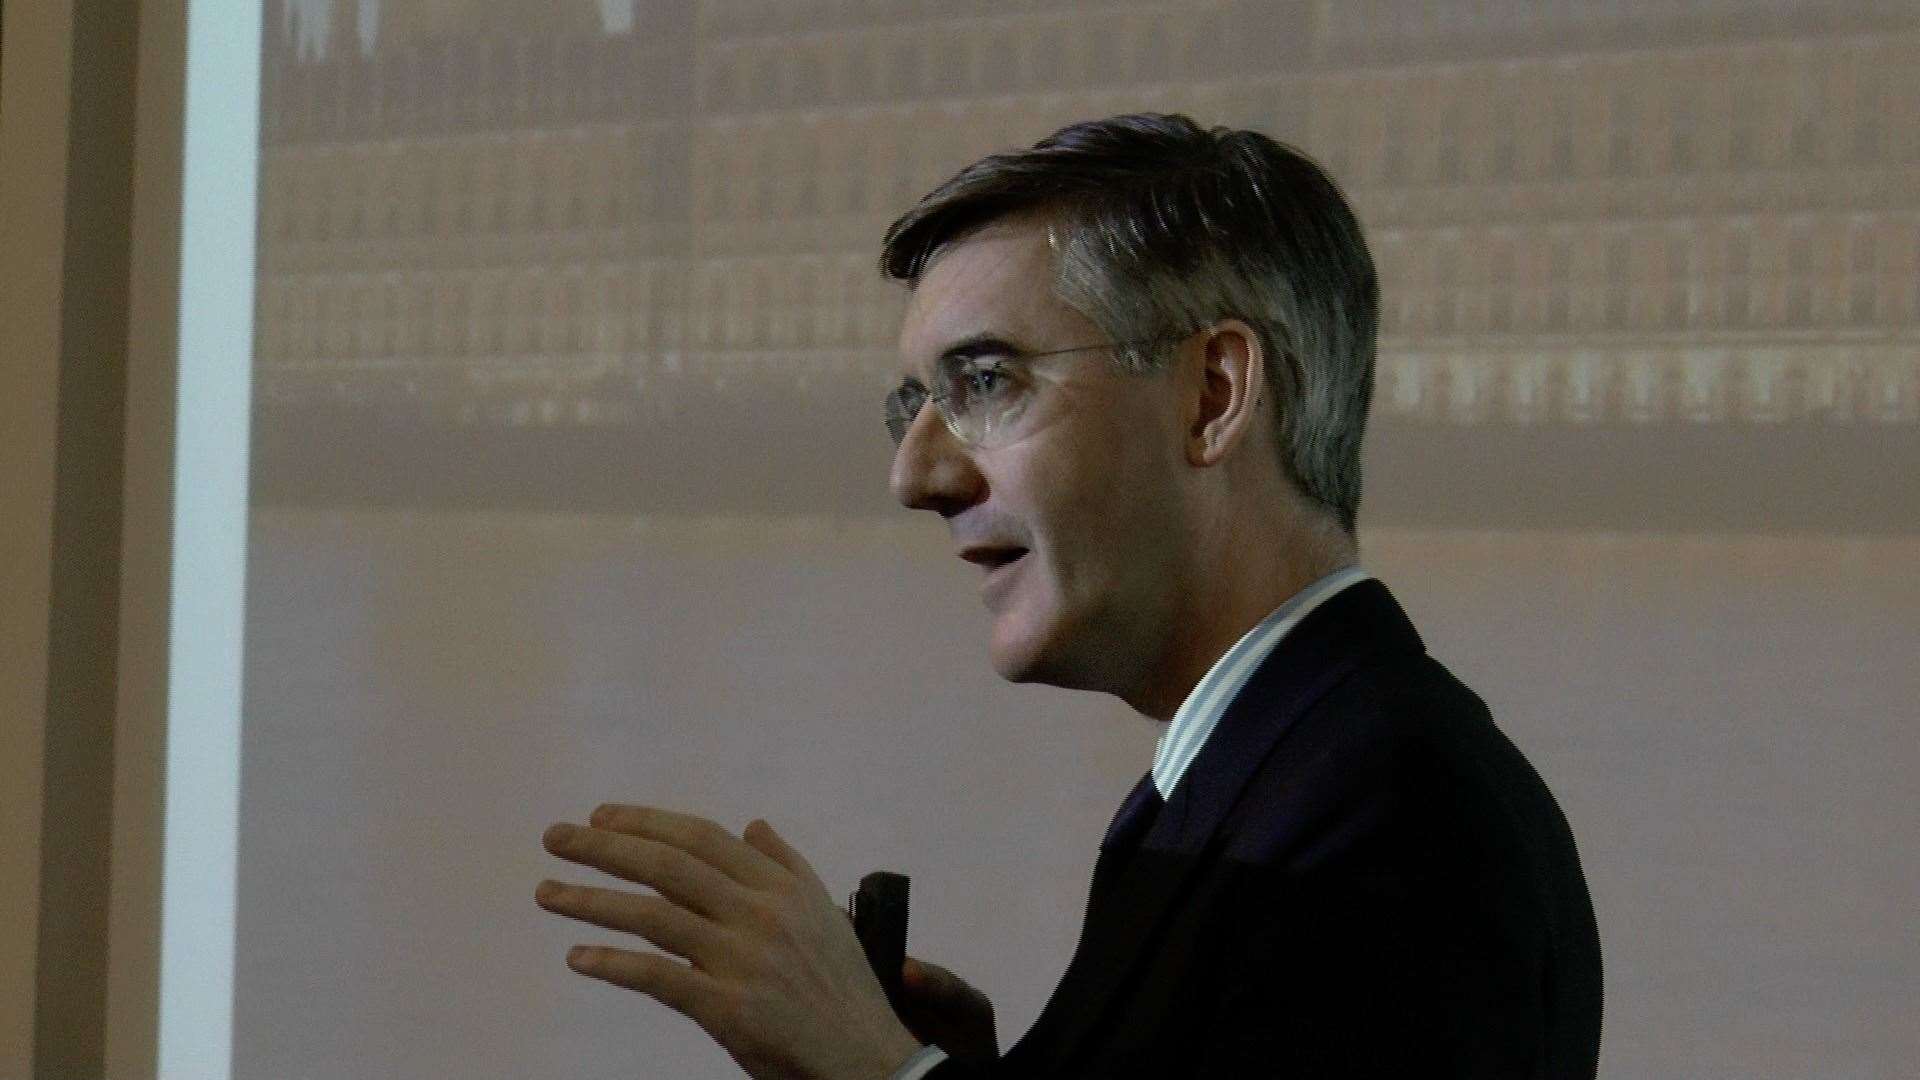 Jacob-Rees Mogg, Leader of the House of Commons